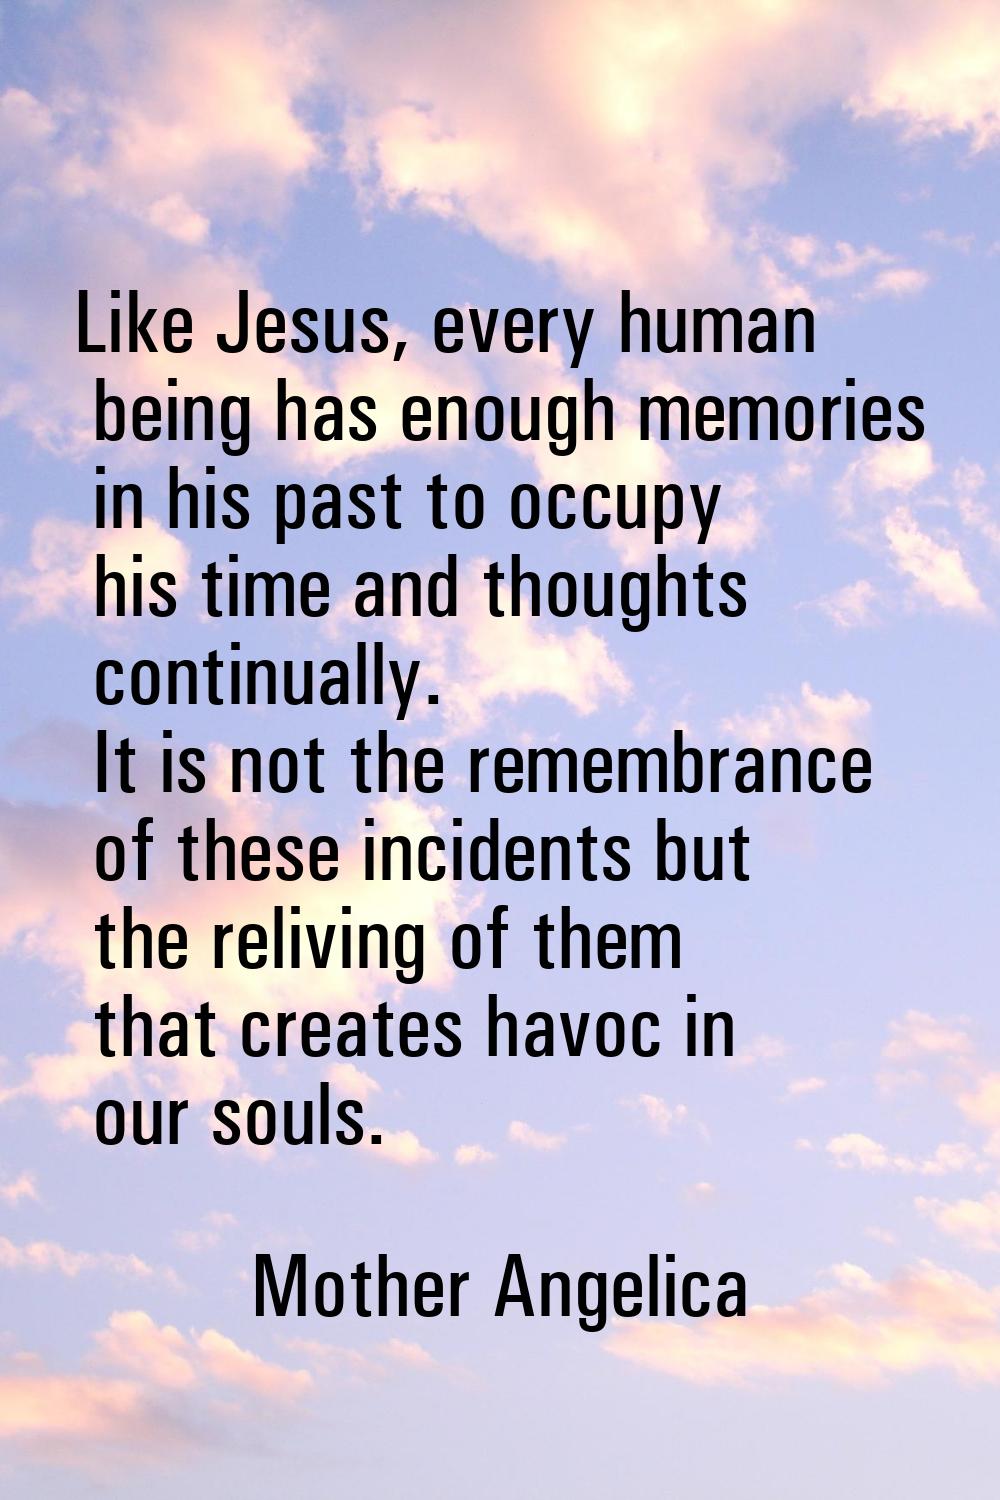 Like Jesus, every human being has enough memories in his past to occupy his time and thoughts conti